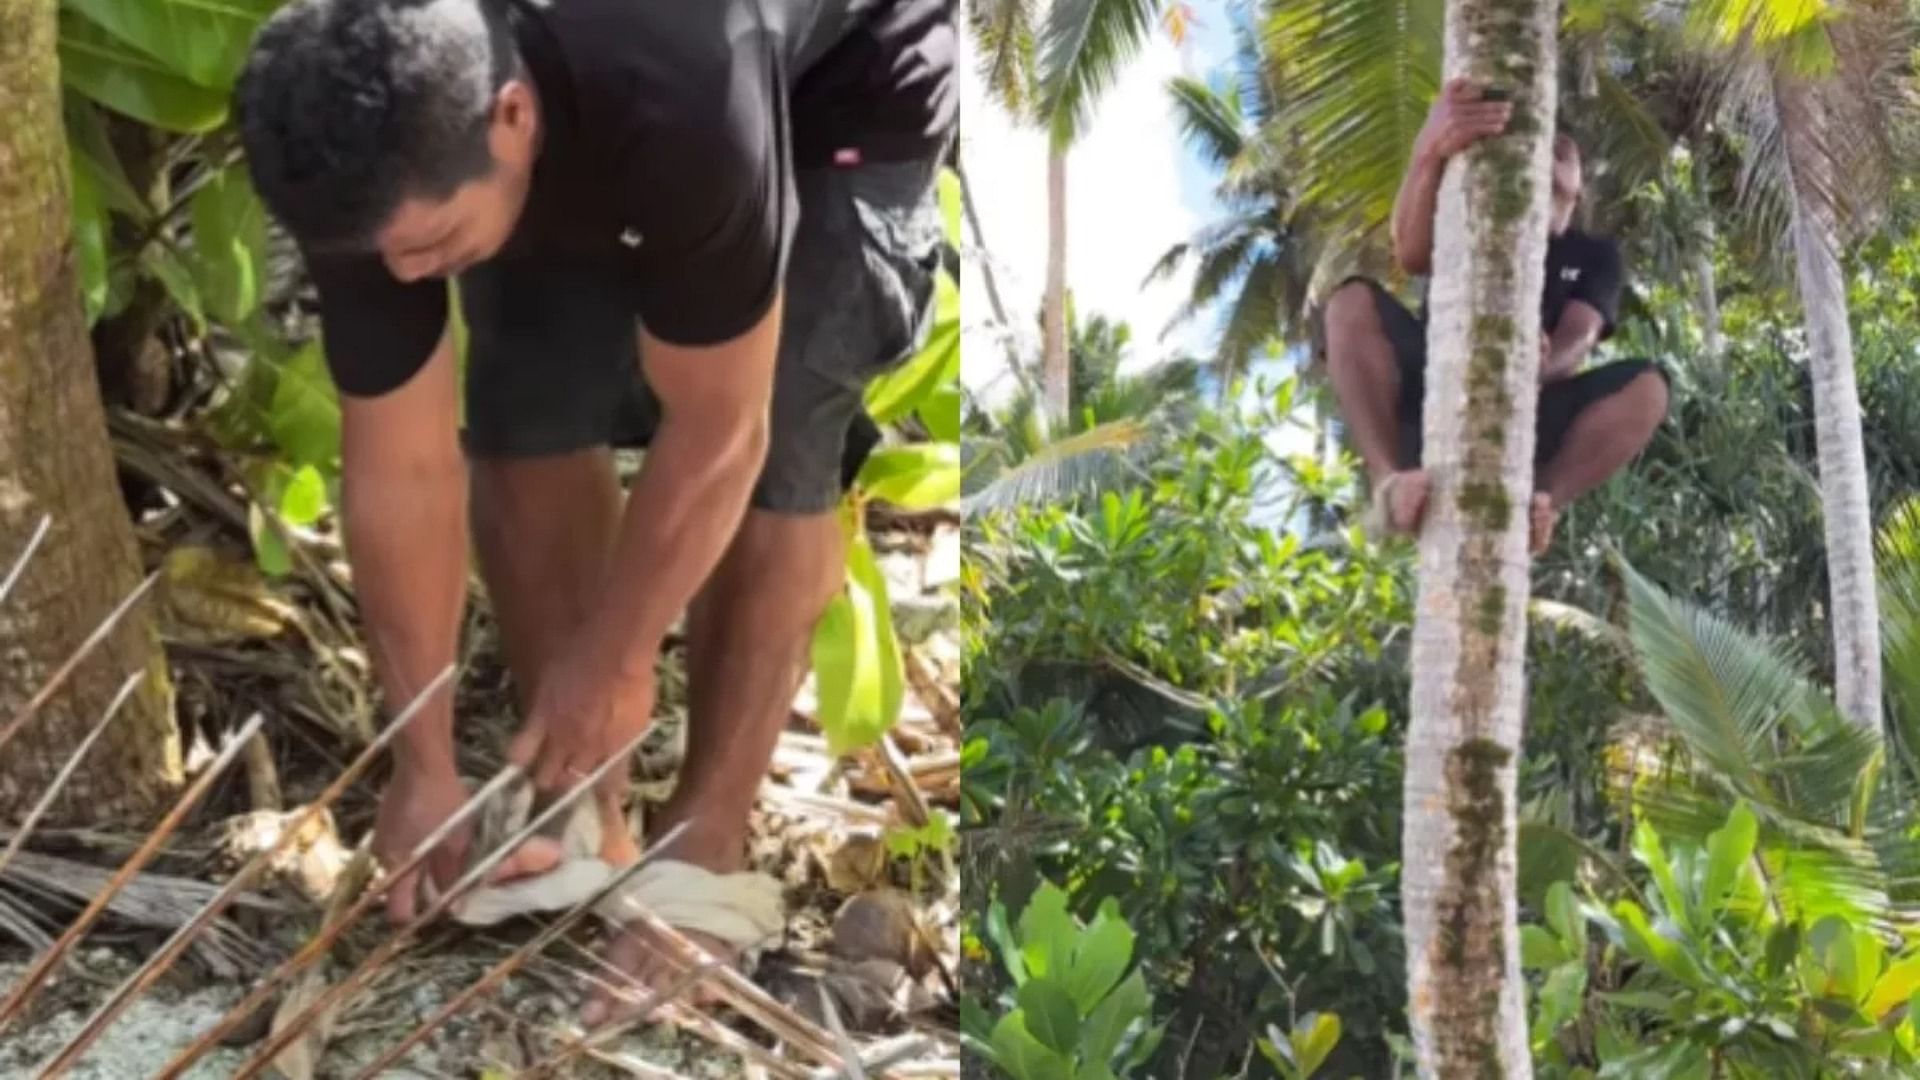 the man stuck a tshirt in his legs and easily climbed the coconut tree video viral on internet